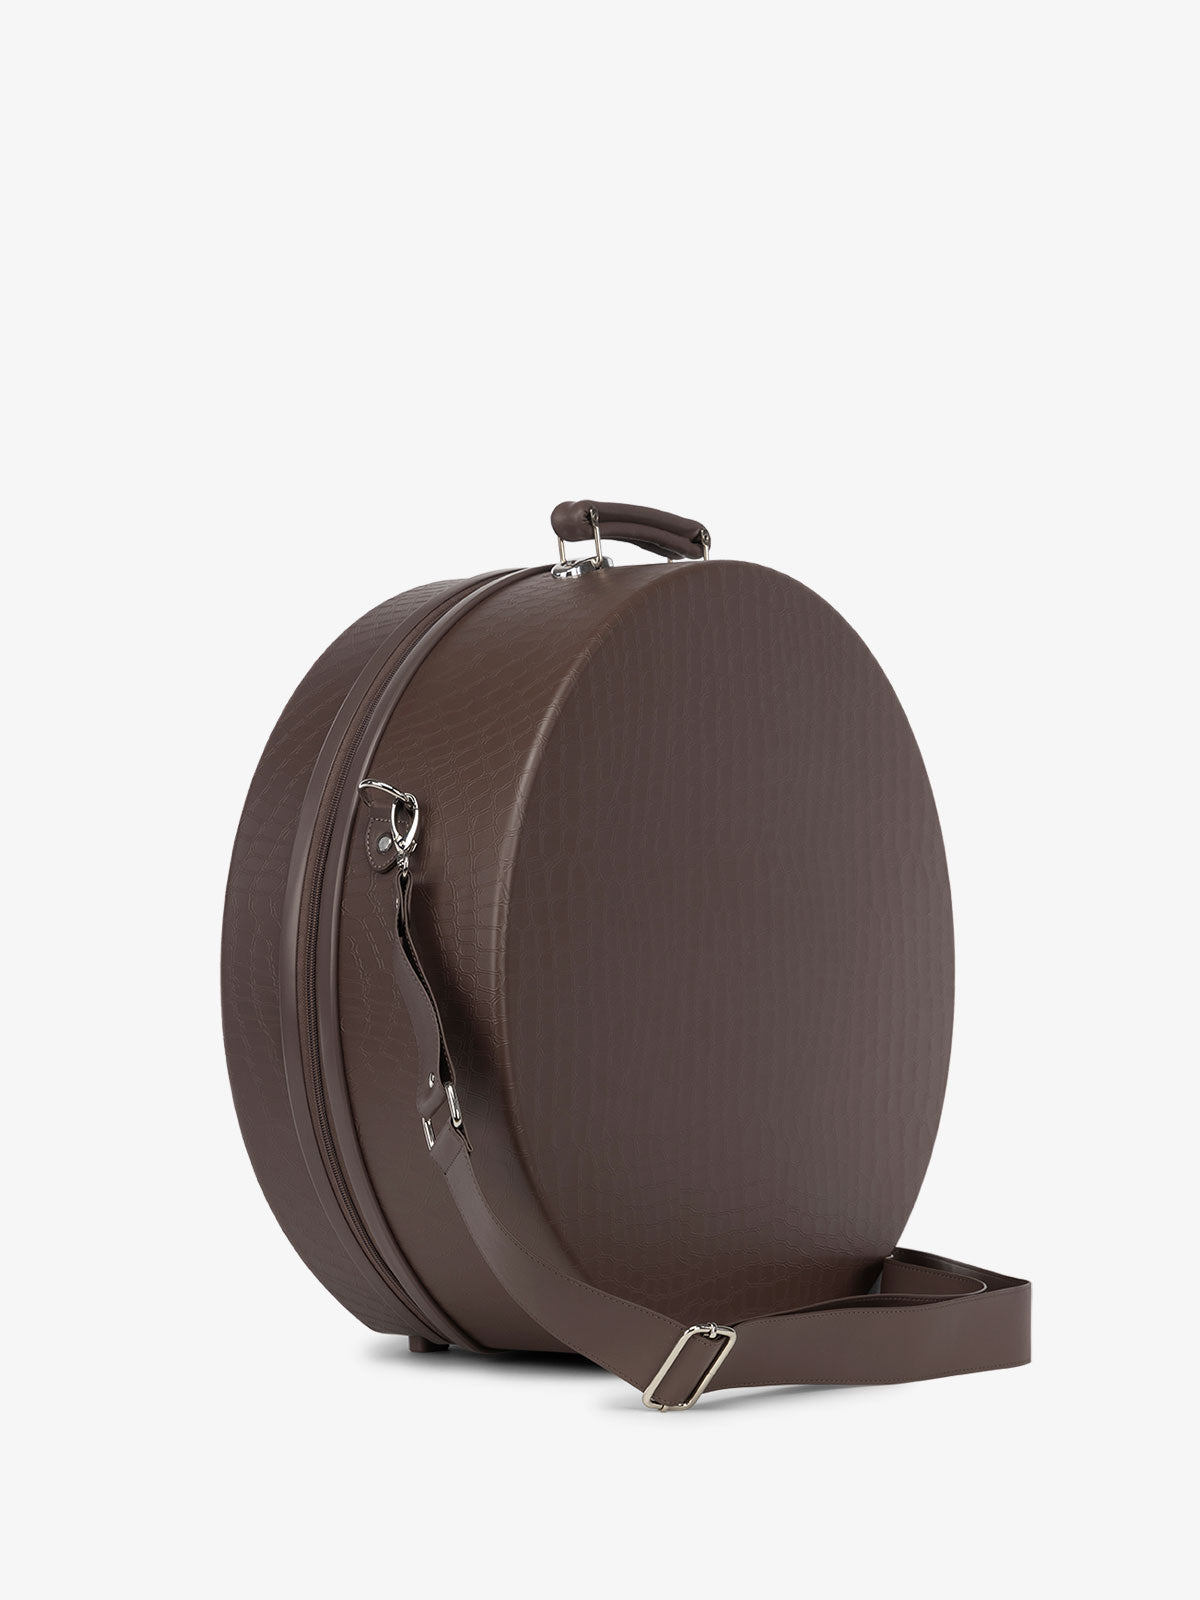 CALPAK TRNK large travel hat box with removable shoulder strap, top handle and water resistant hard-shell in espresso